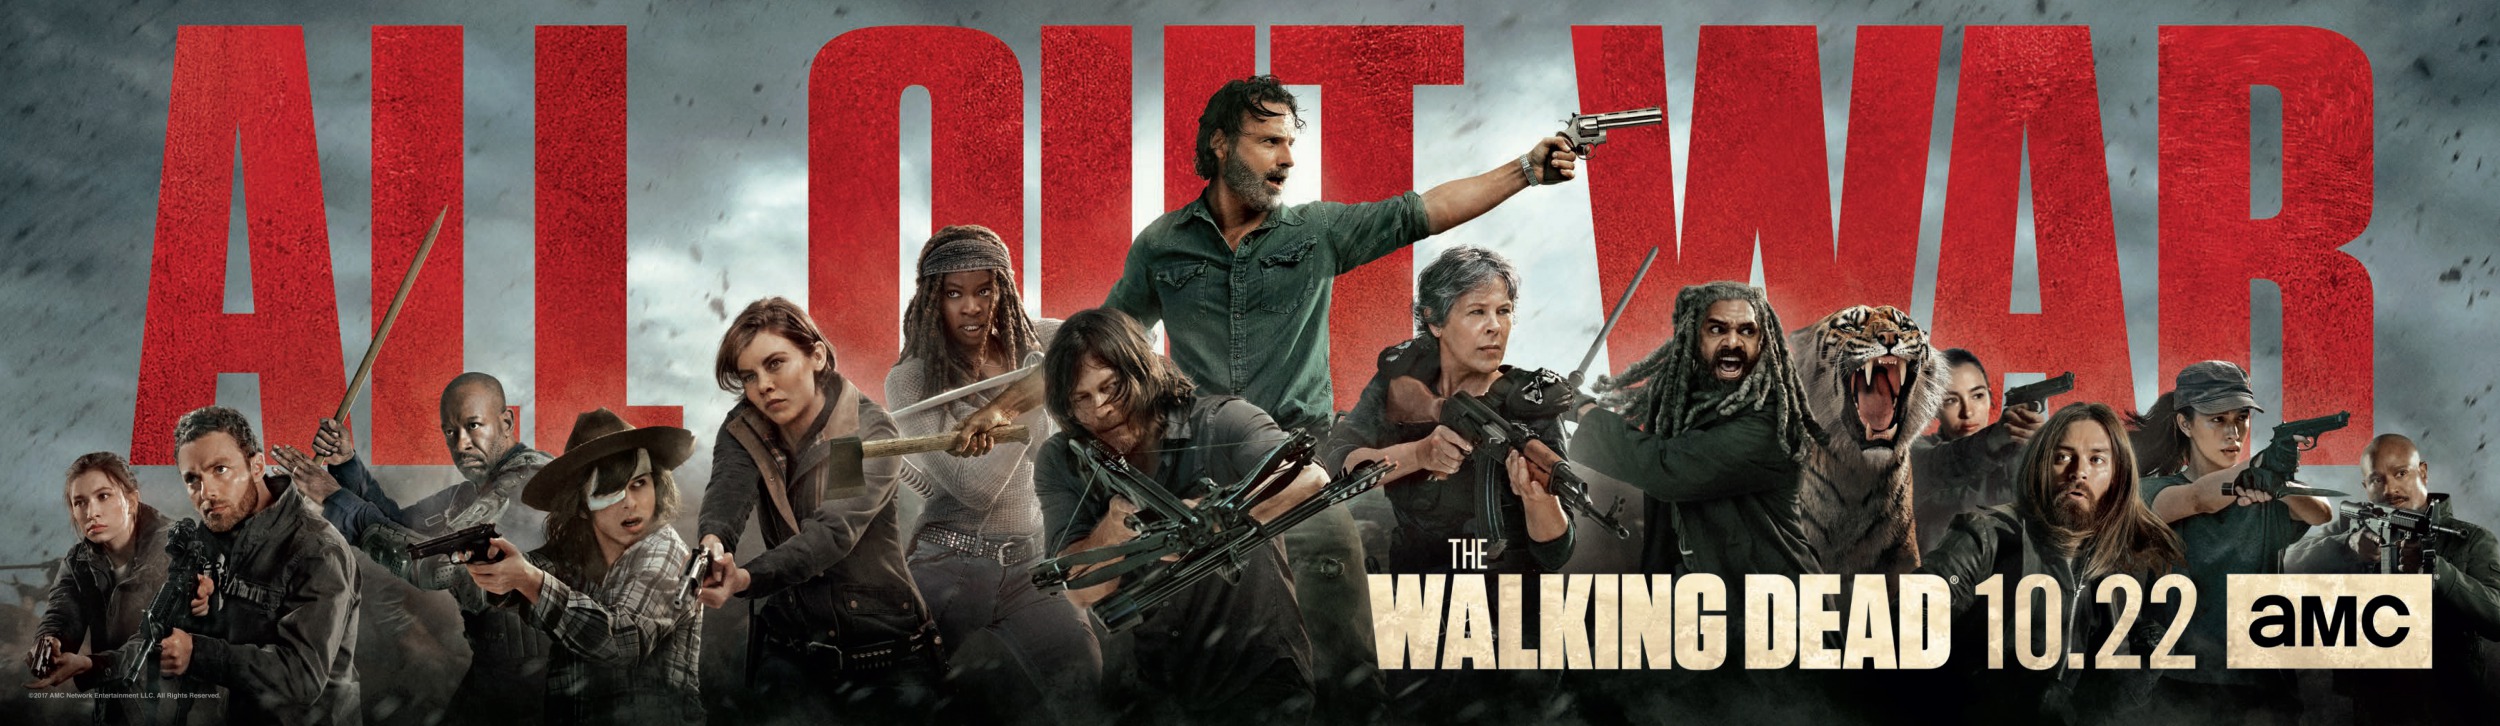 Mega Sized TV Poster Image for The Walking Dead (#49 of 67)